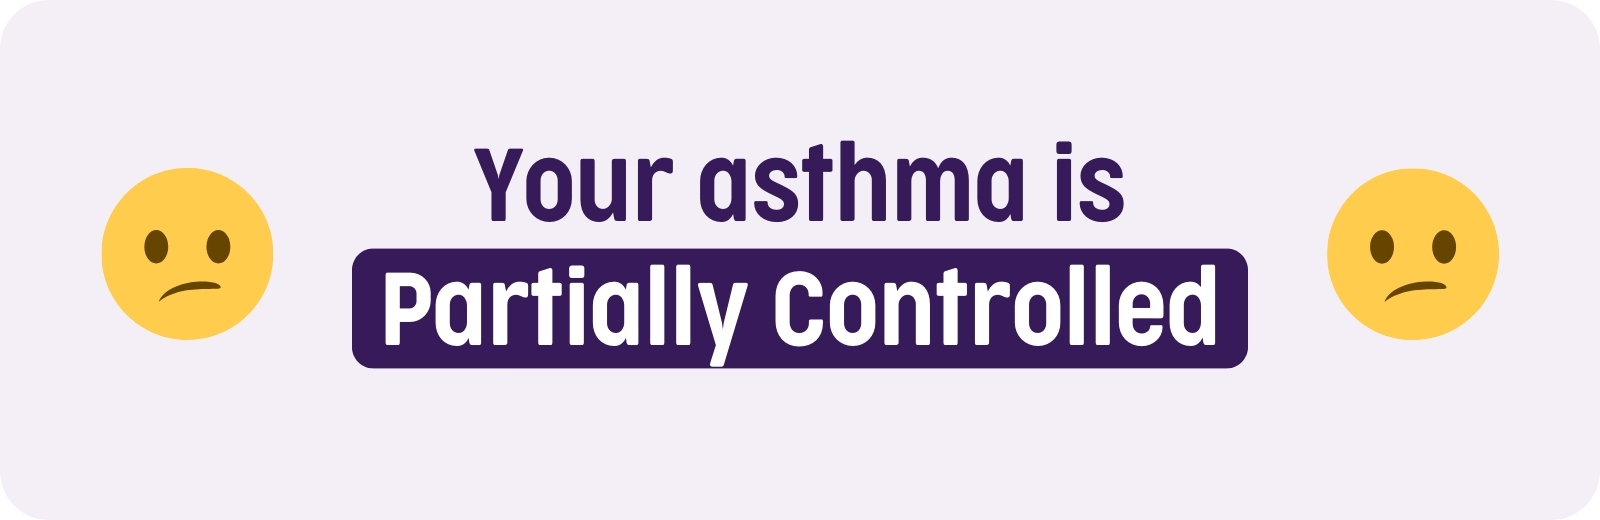 Asthma Control Questionaire, Partially Controlled Asthma